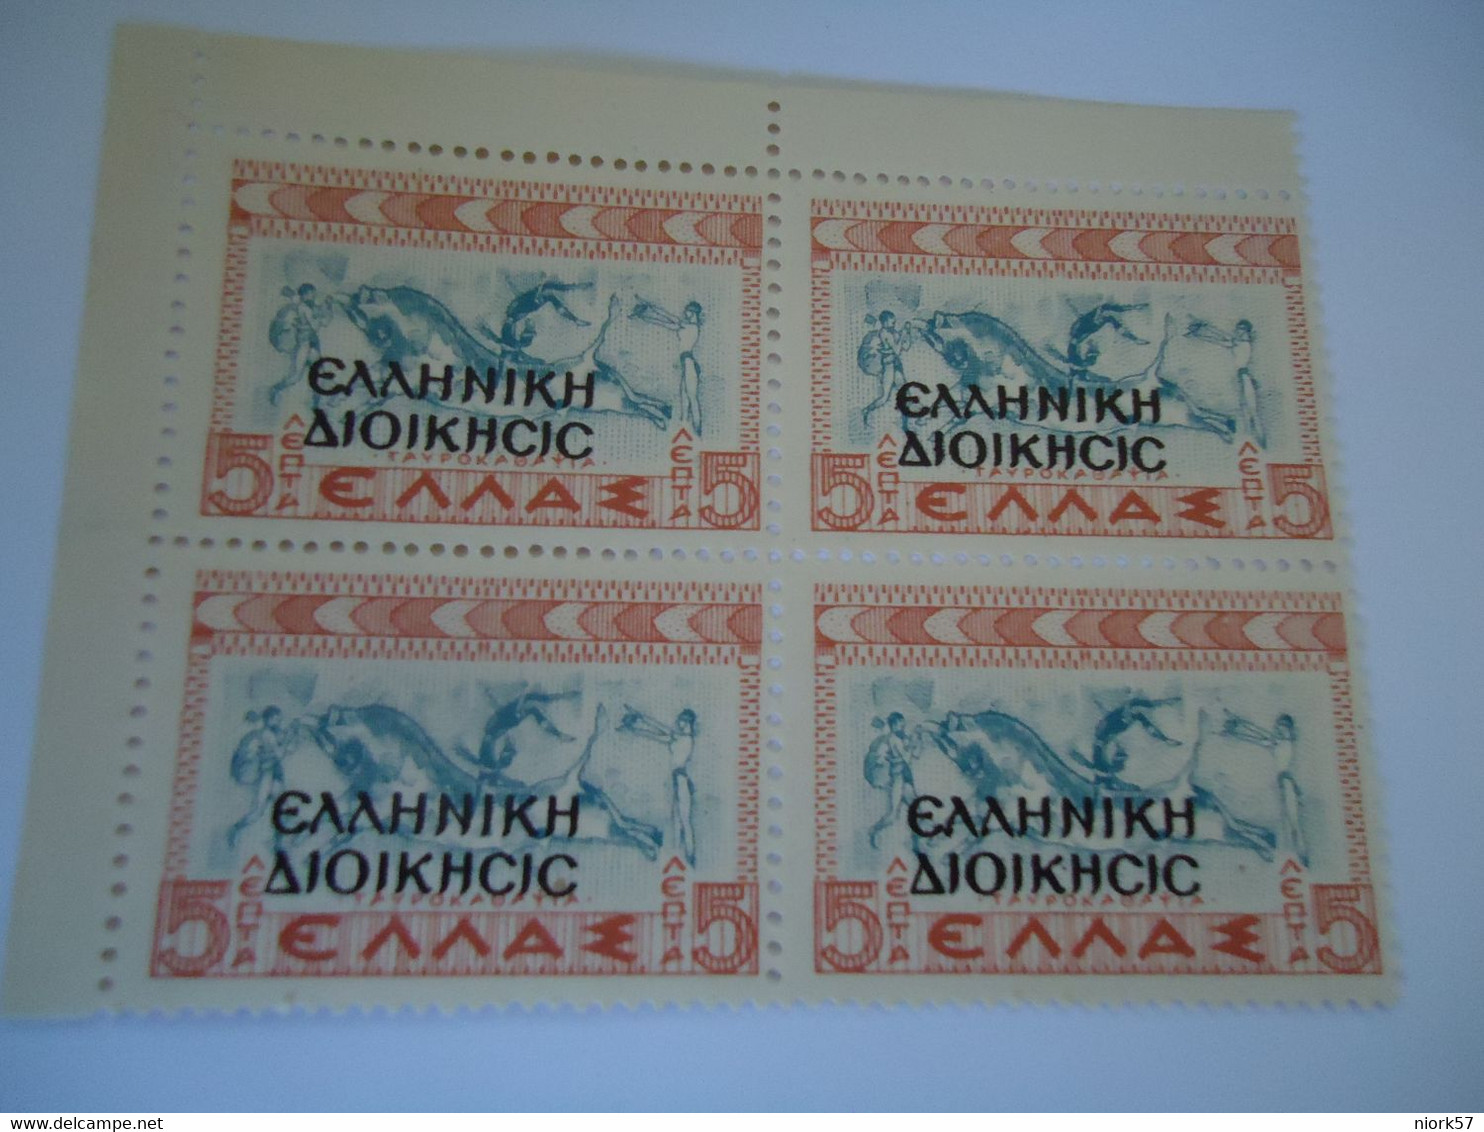 GREECE   MNH STAMPS BLOCK OF 4  CHARITY ΕΛΛΗΝΙΚΗ ΔΙΟΙΚΗΣΗ - Used Stamps